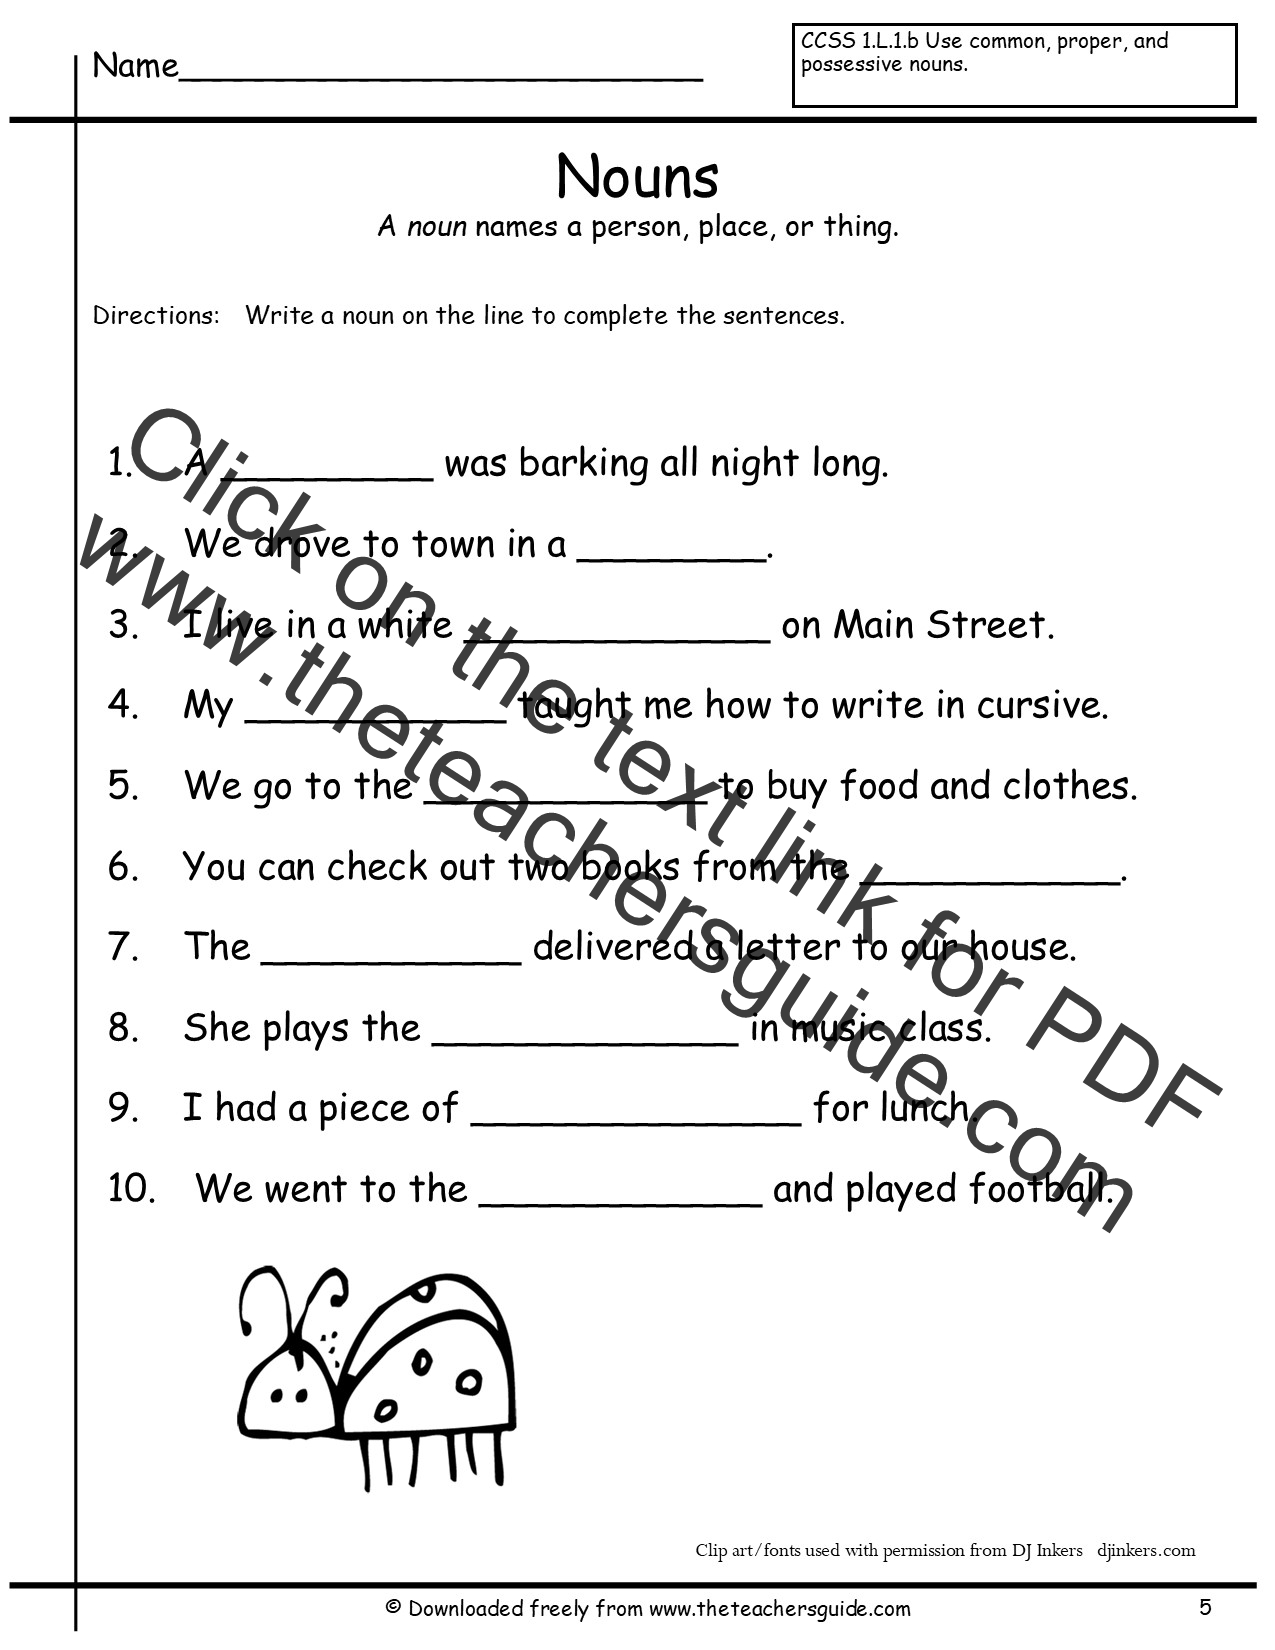 nouns-pictures-worksheets